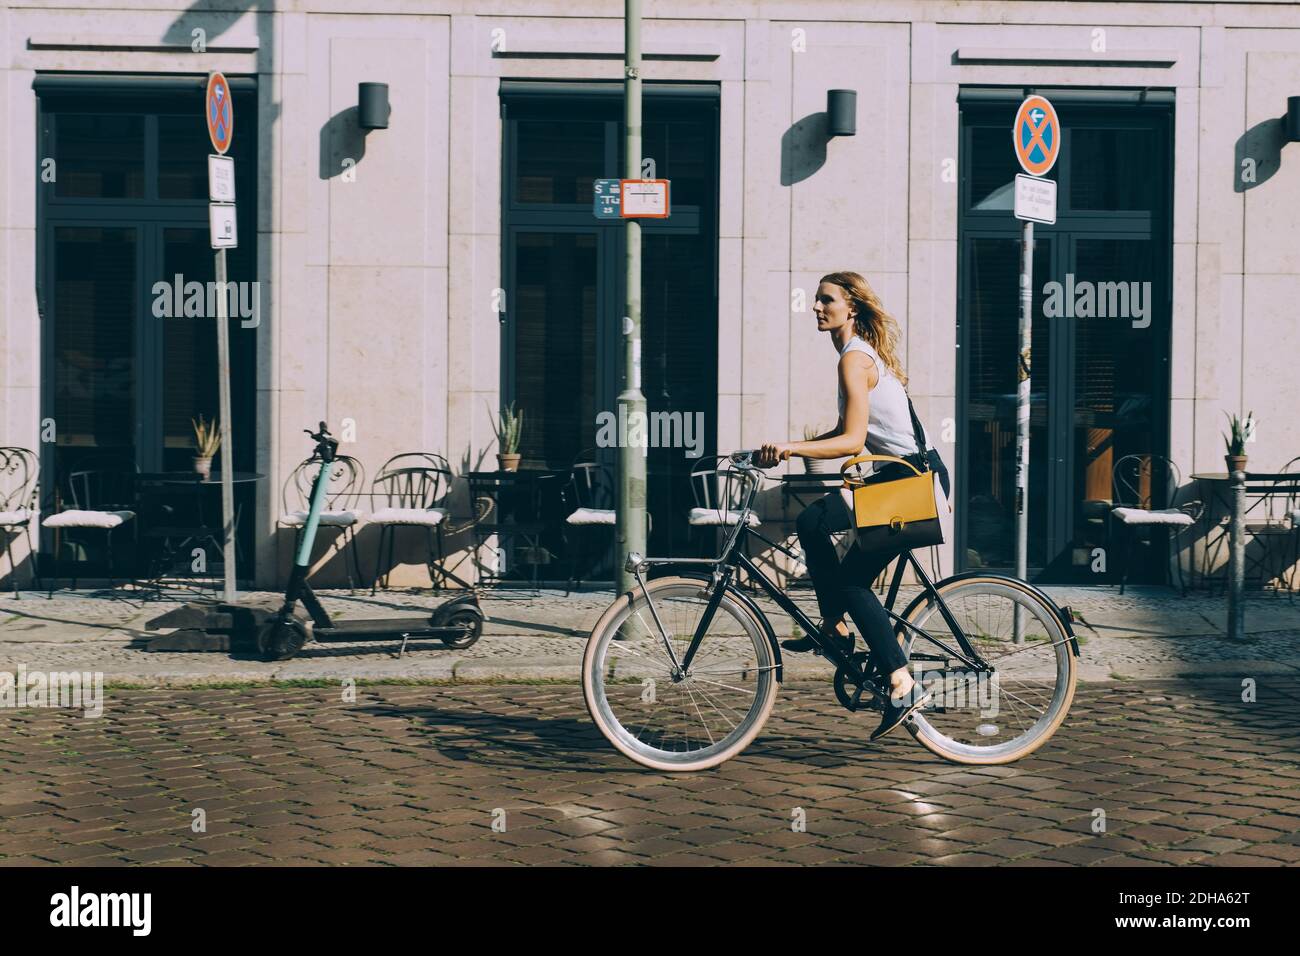 Full length of businesswoman riding bicycle against building on street in city Stock Photo